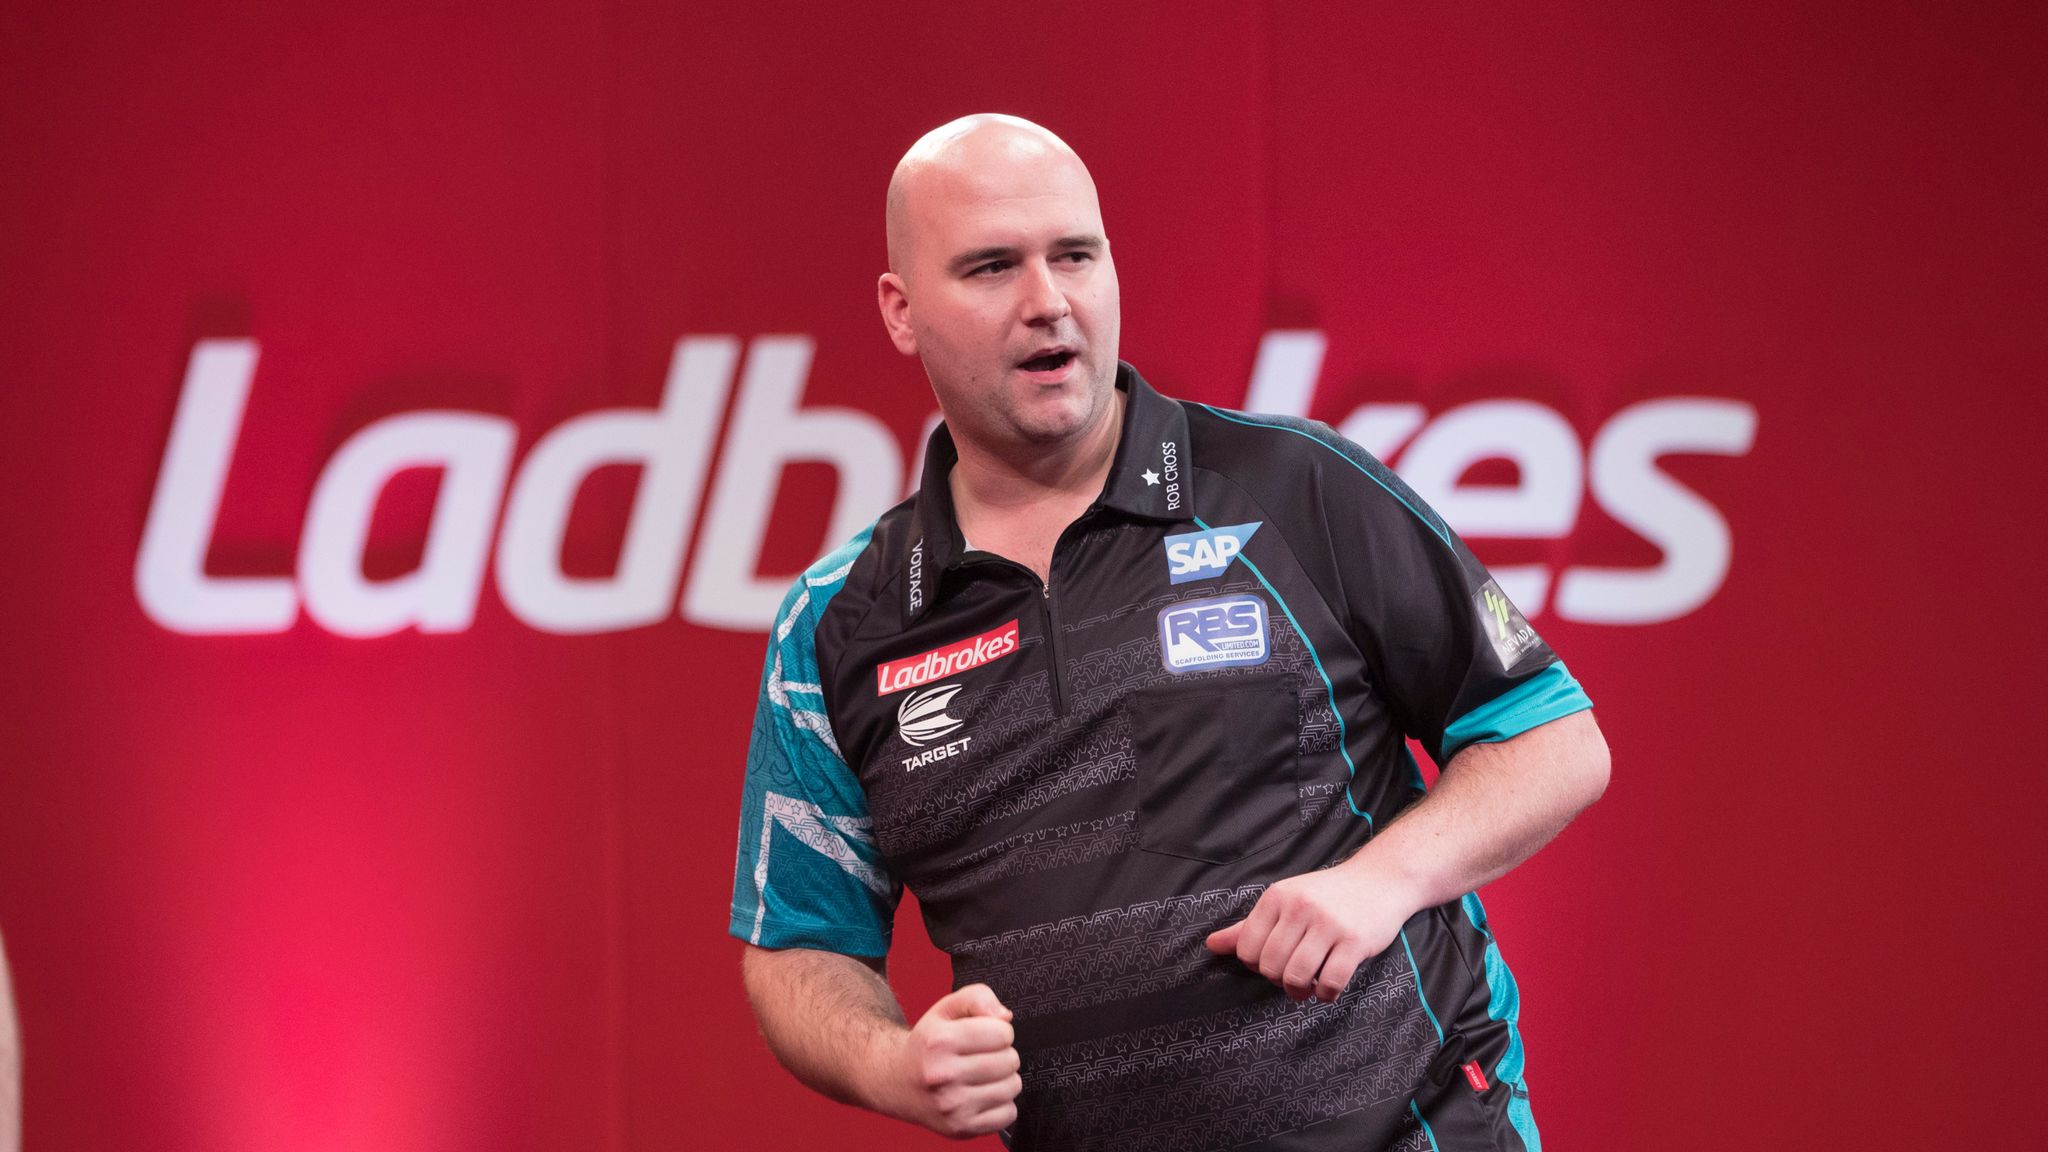 Rob Cross ran out of puff in UK Open final, says Wayne Mardle Darts News Sky Sports